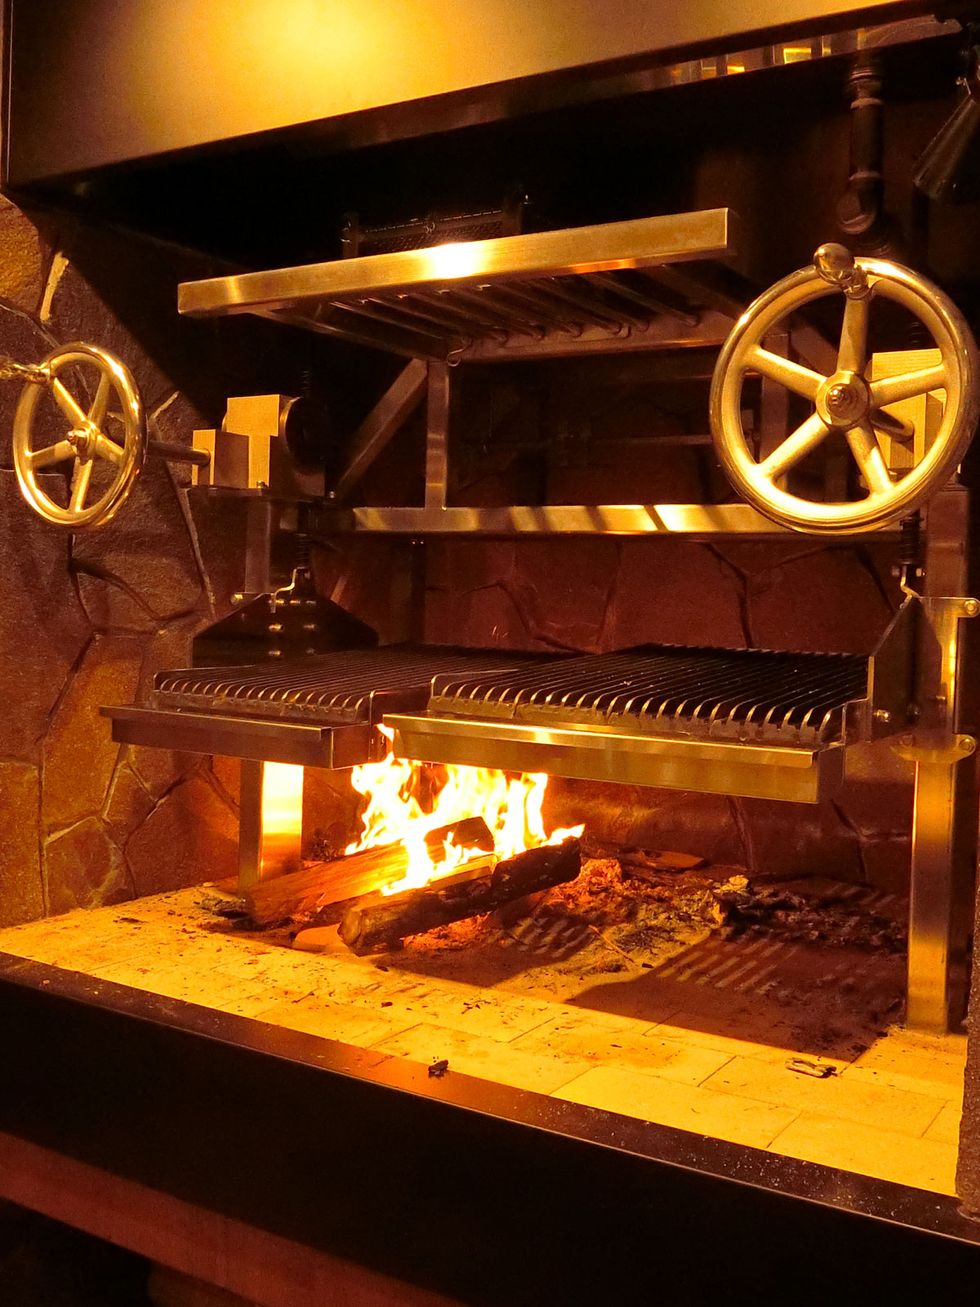 Wood, Heat, Gas, Iron, Spoke, Machine, Flame, Building material, Hearth, Cooking, 